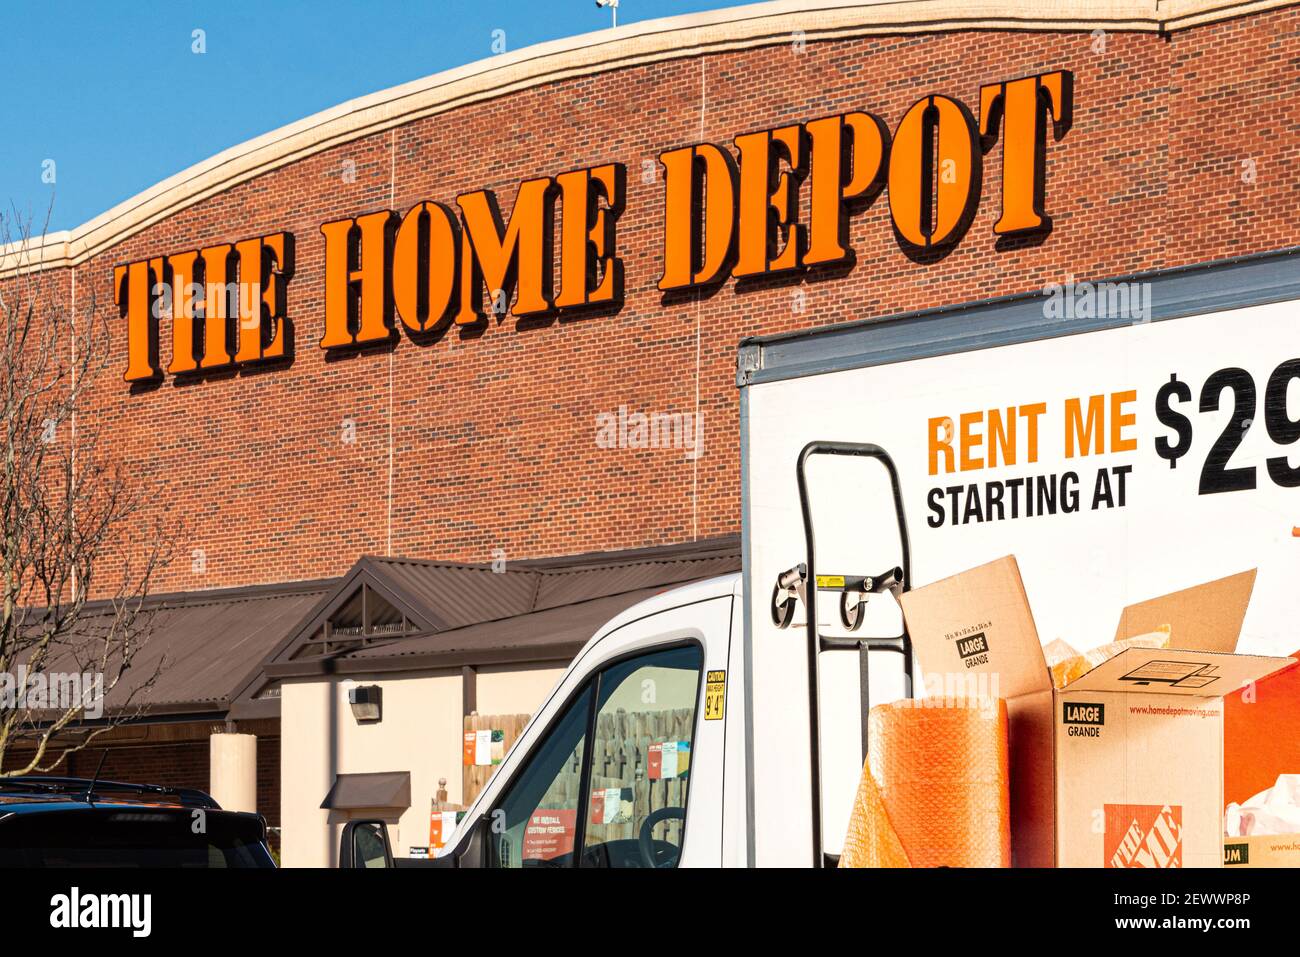 how much is a truck rental from home depot